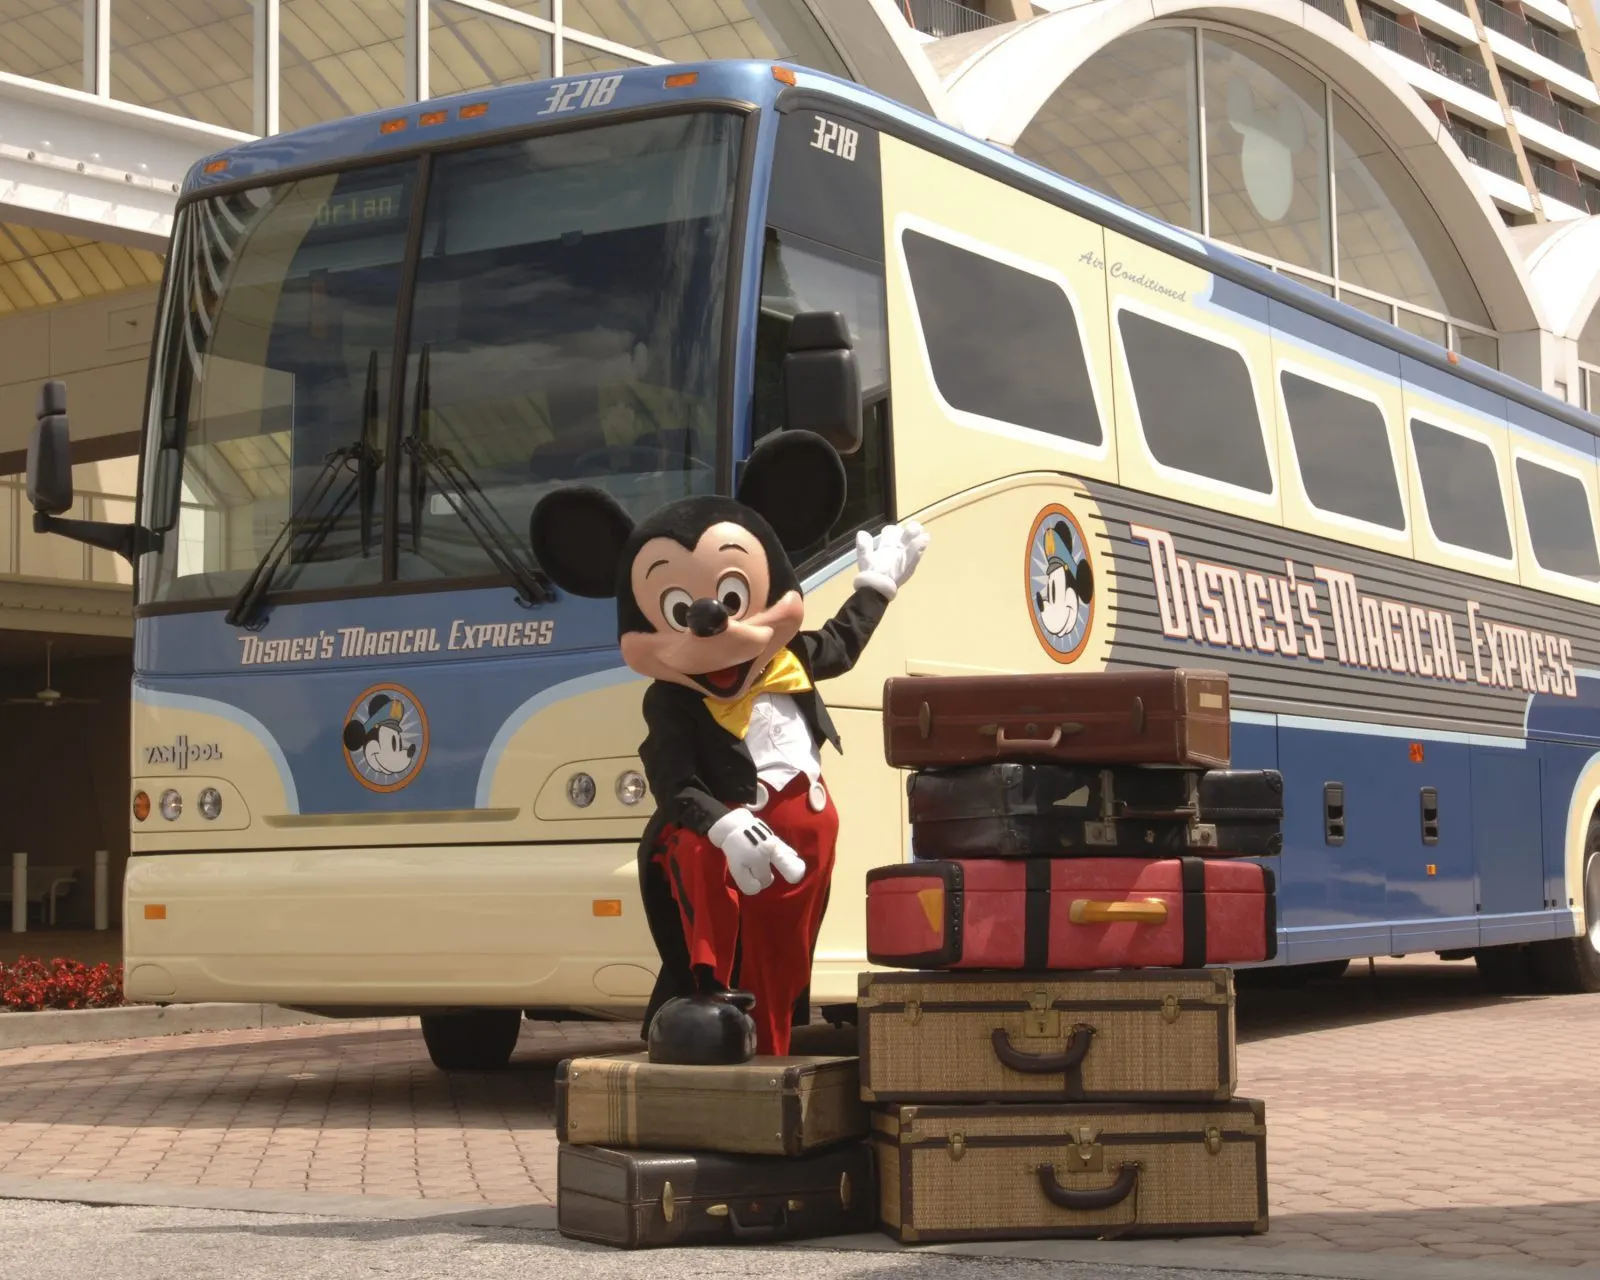 Disney Magical Express bus and Mickey Mouse with luggage